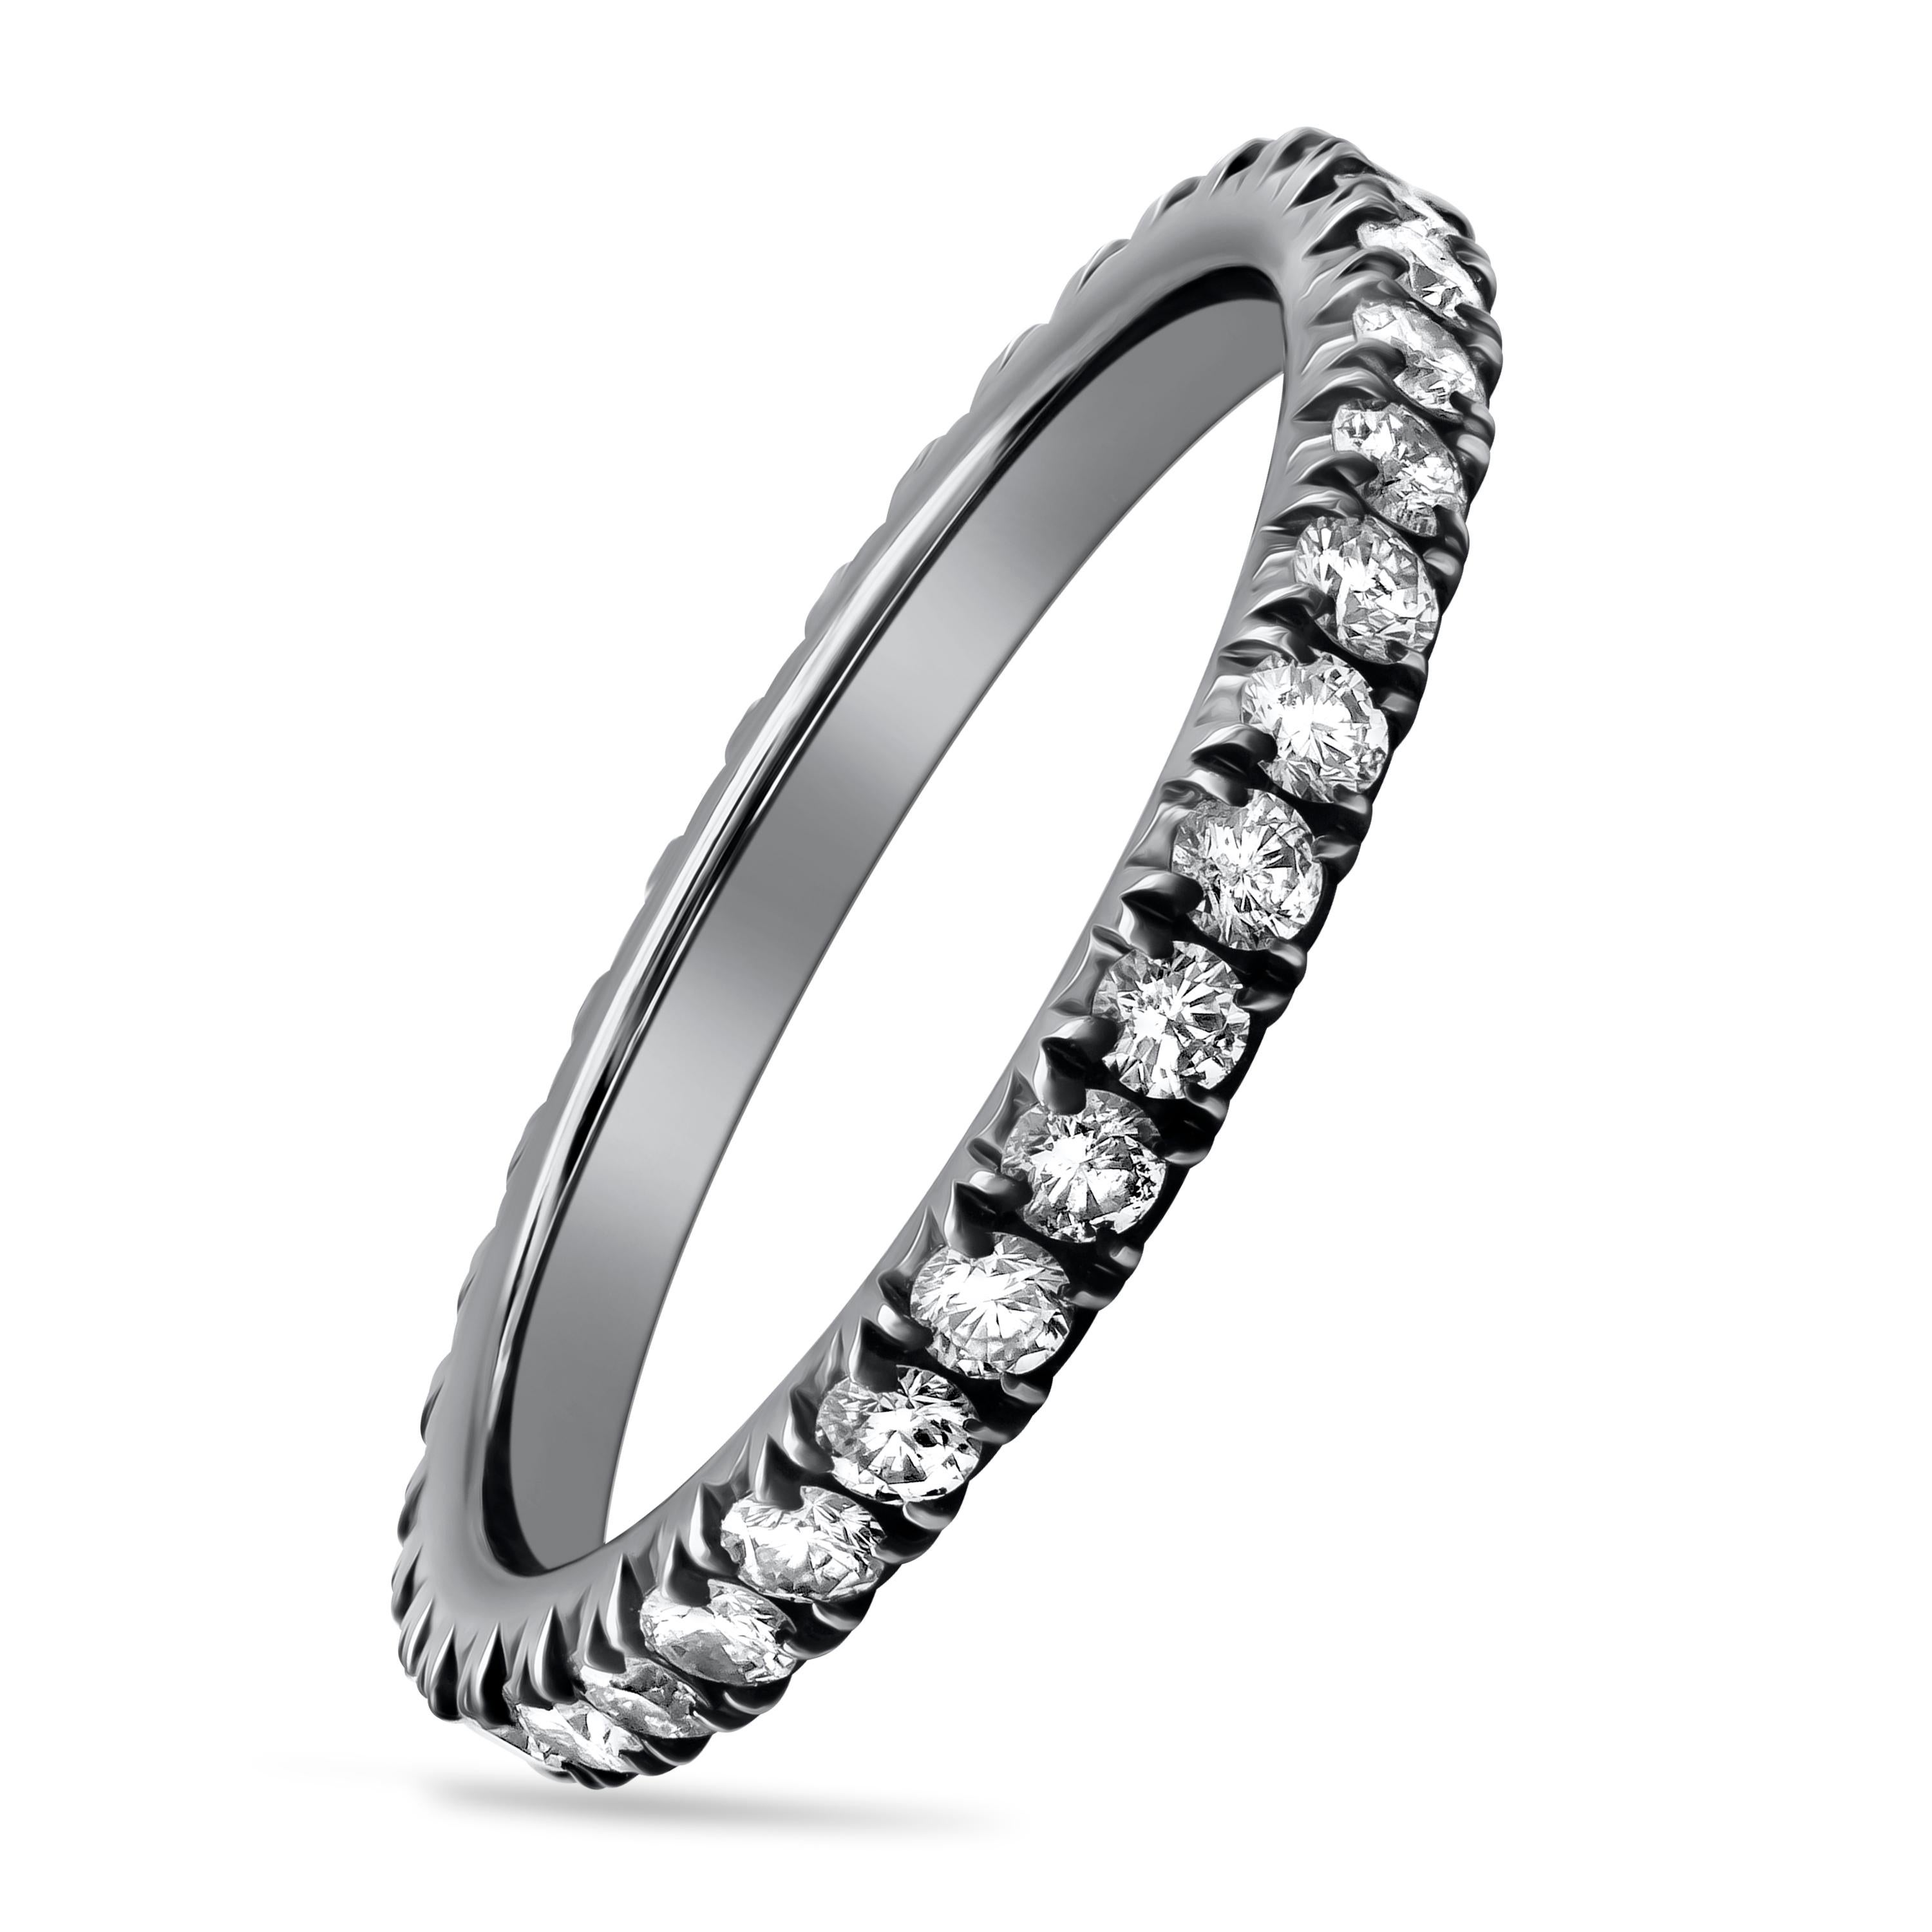 A classic eternity wedding band ring showcasing brilliant round diamonds weighing 0.70 carats total, G Color and SI3 in Clarity. Set in a french-pave setting, Made with 18K Black Rhodium Plated, Size 6.5 US resizable upon request.

Style available